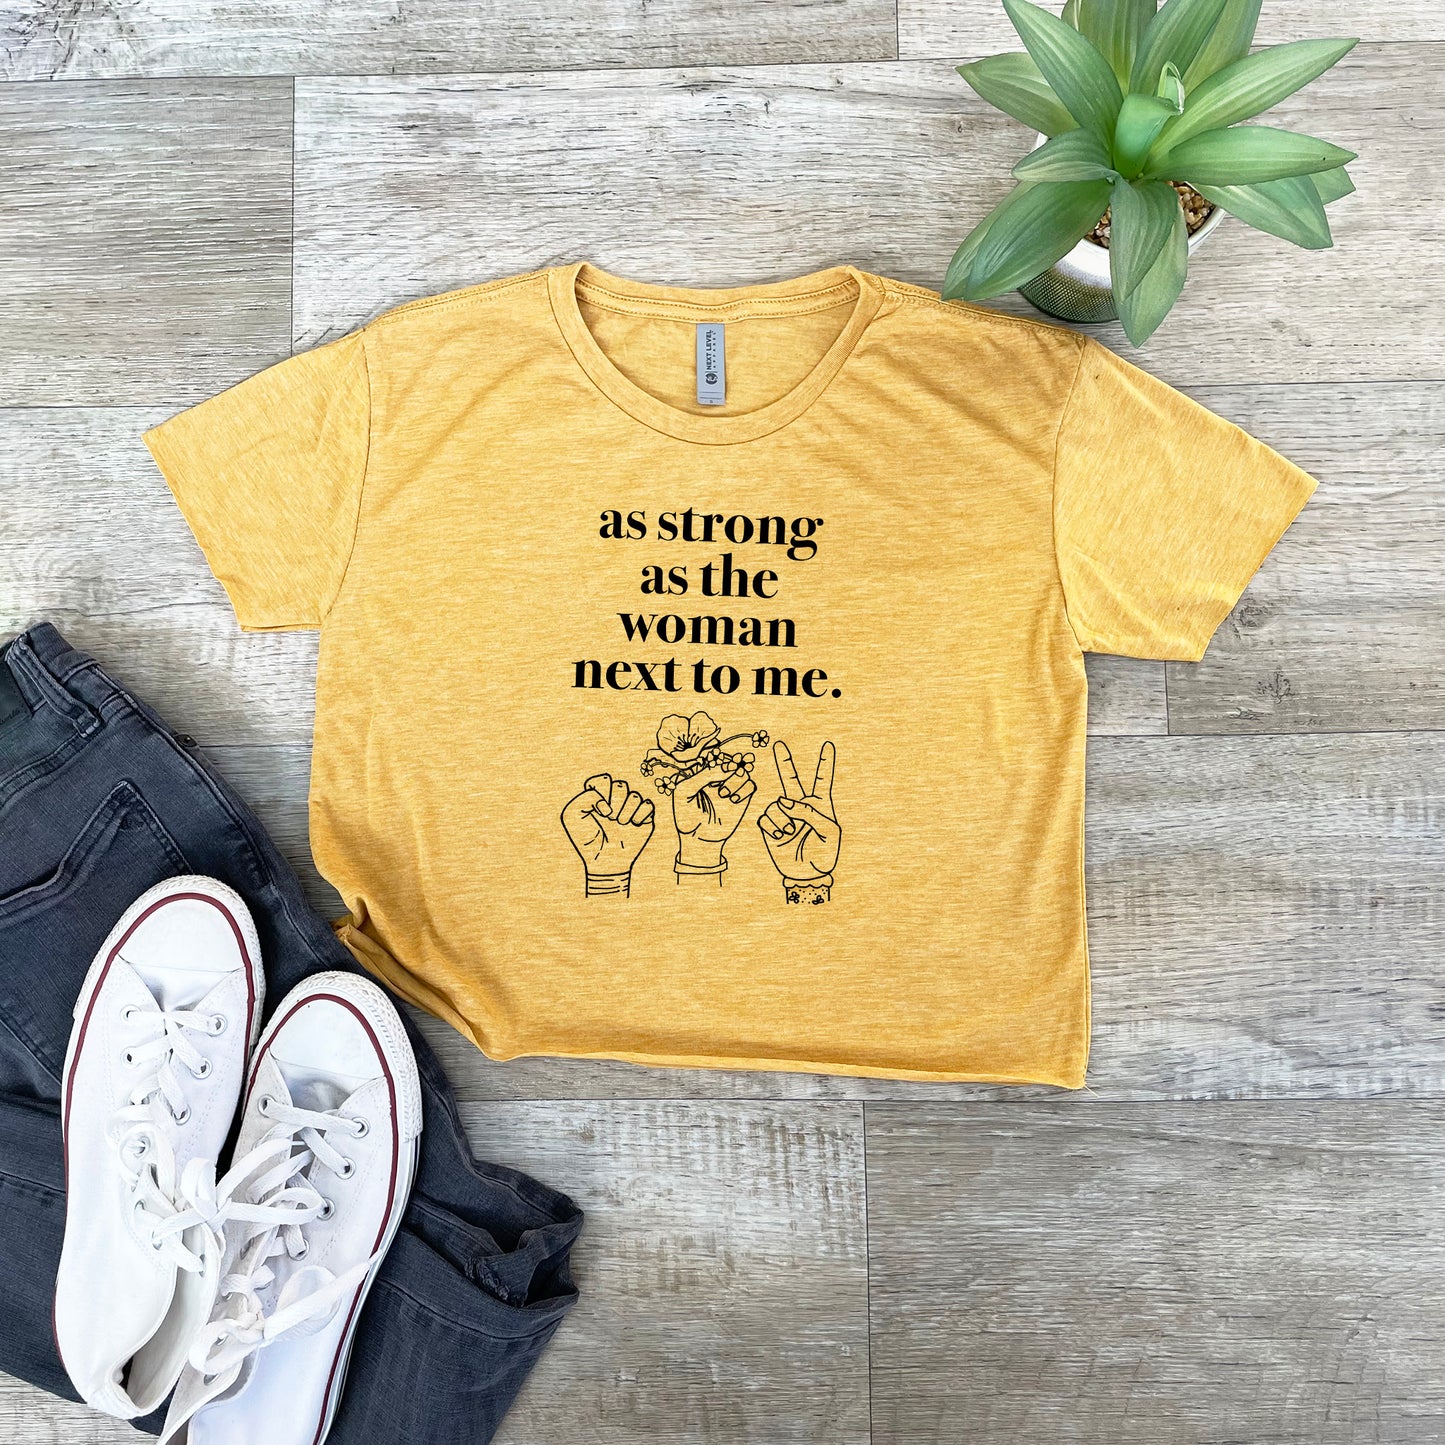 As Strong As The Woman Next To Me - Women's Crop Tee - Heather Gray or Gold